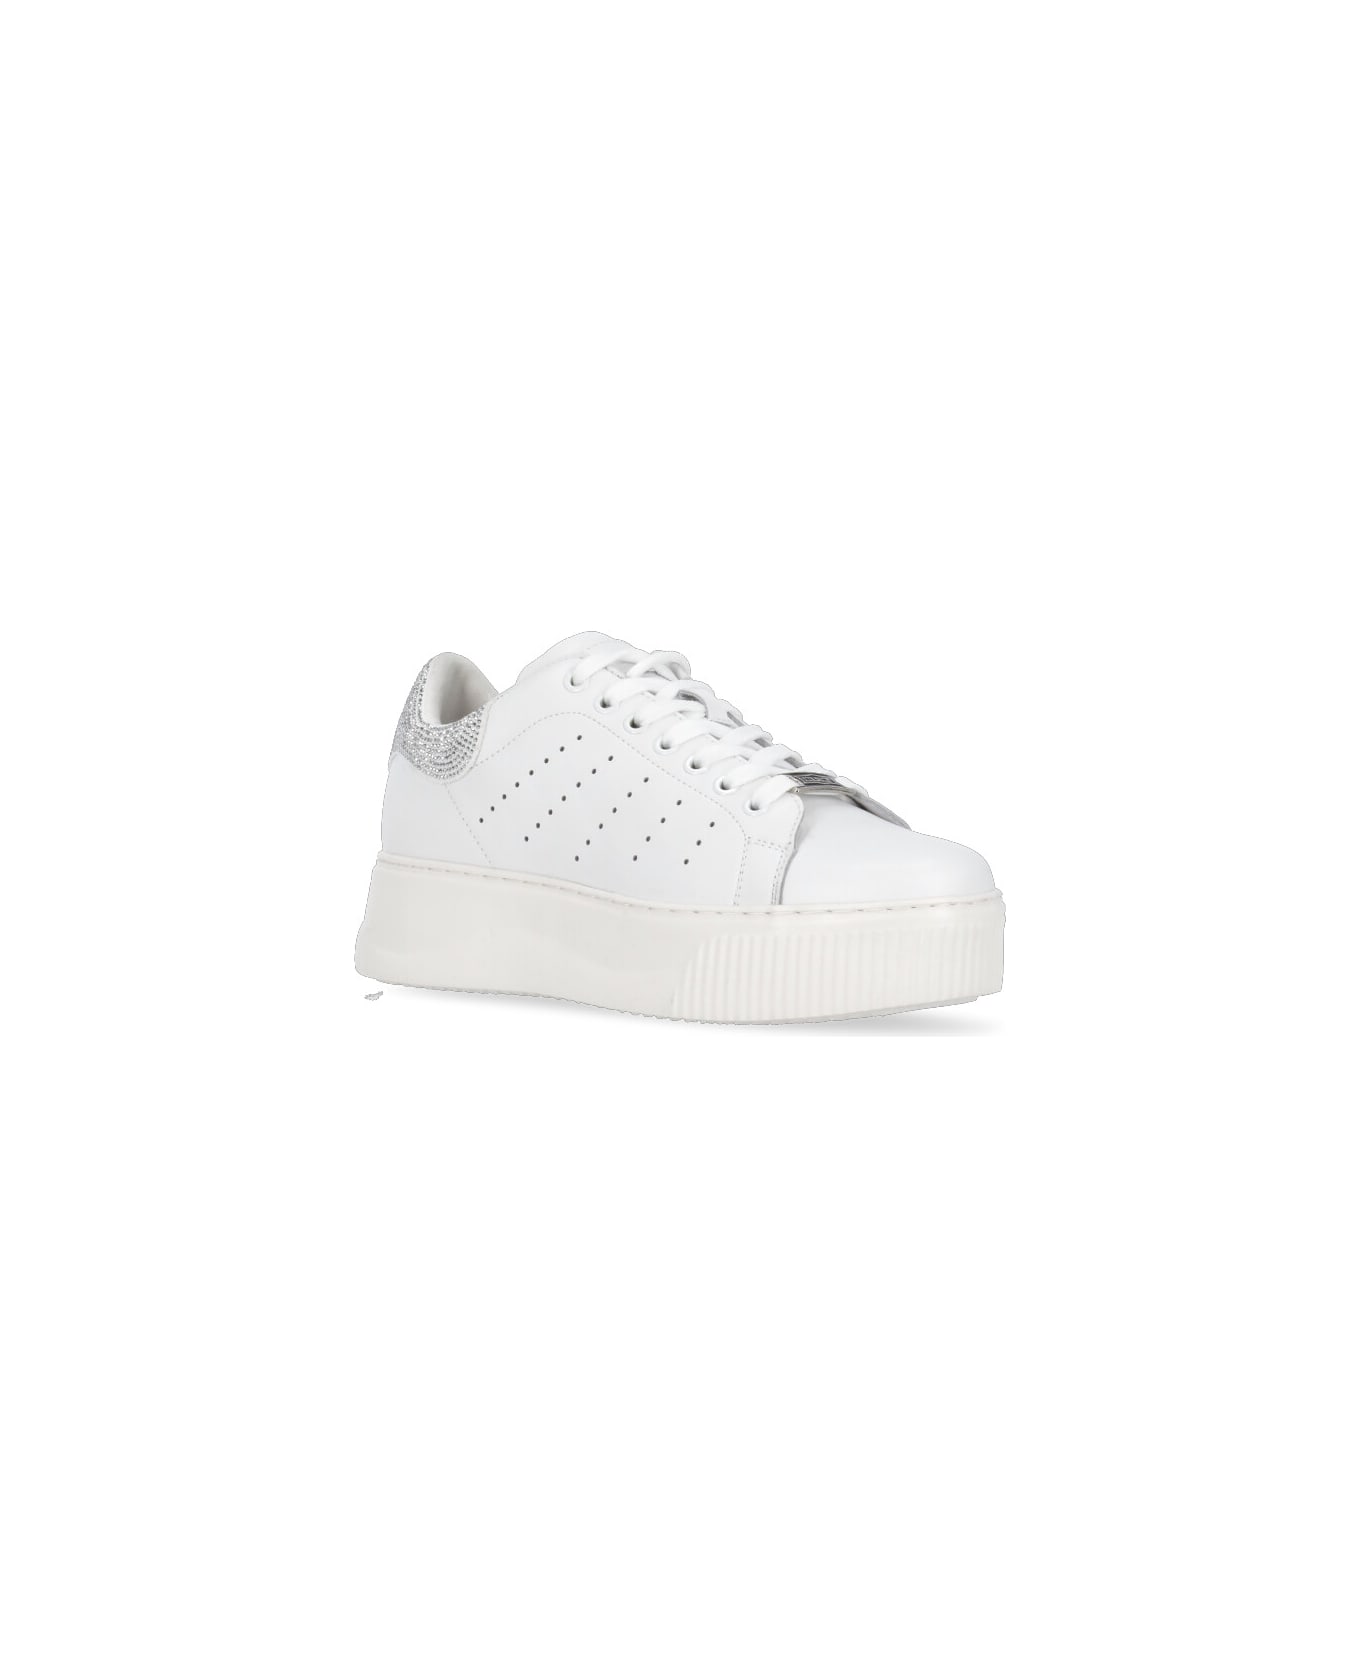 Cult Perry 3162 Sneakers - White スニーカー